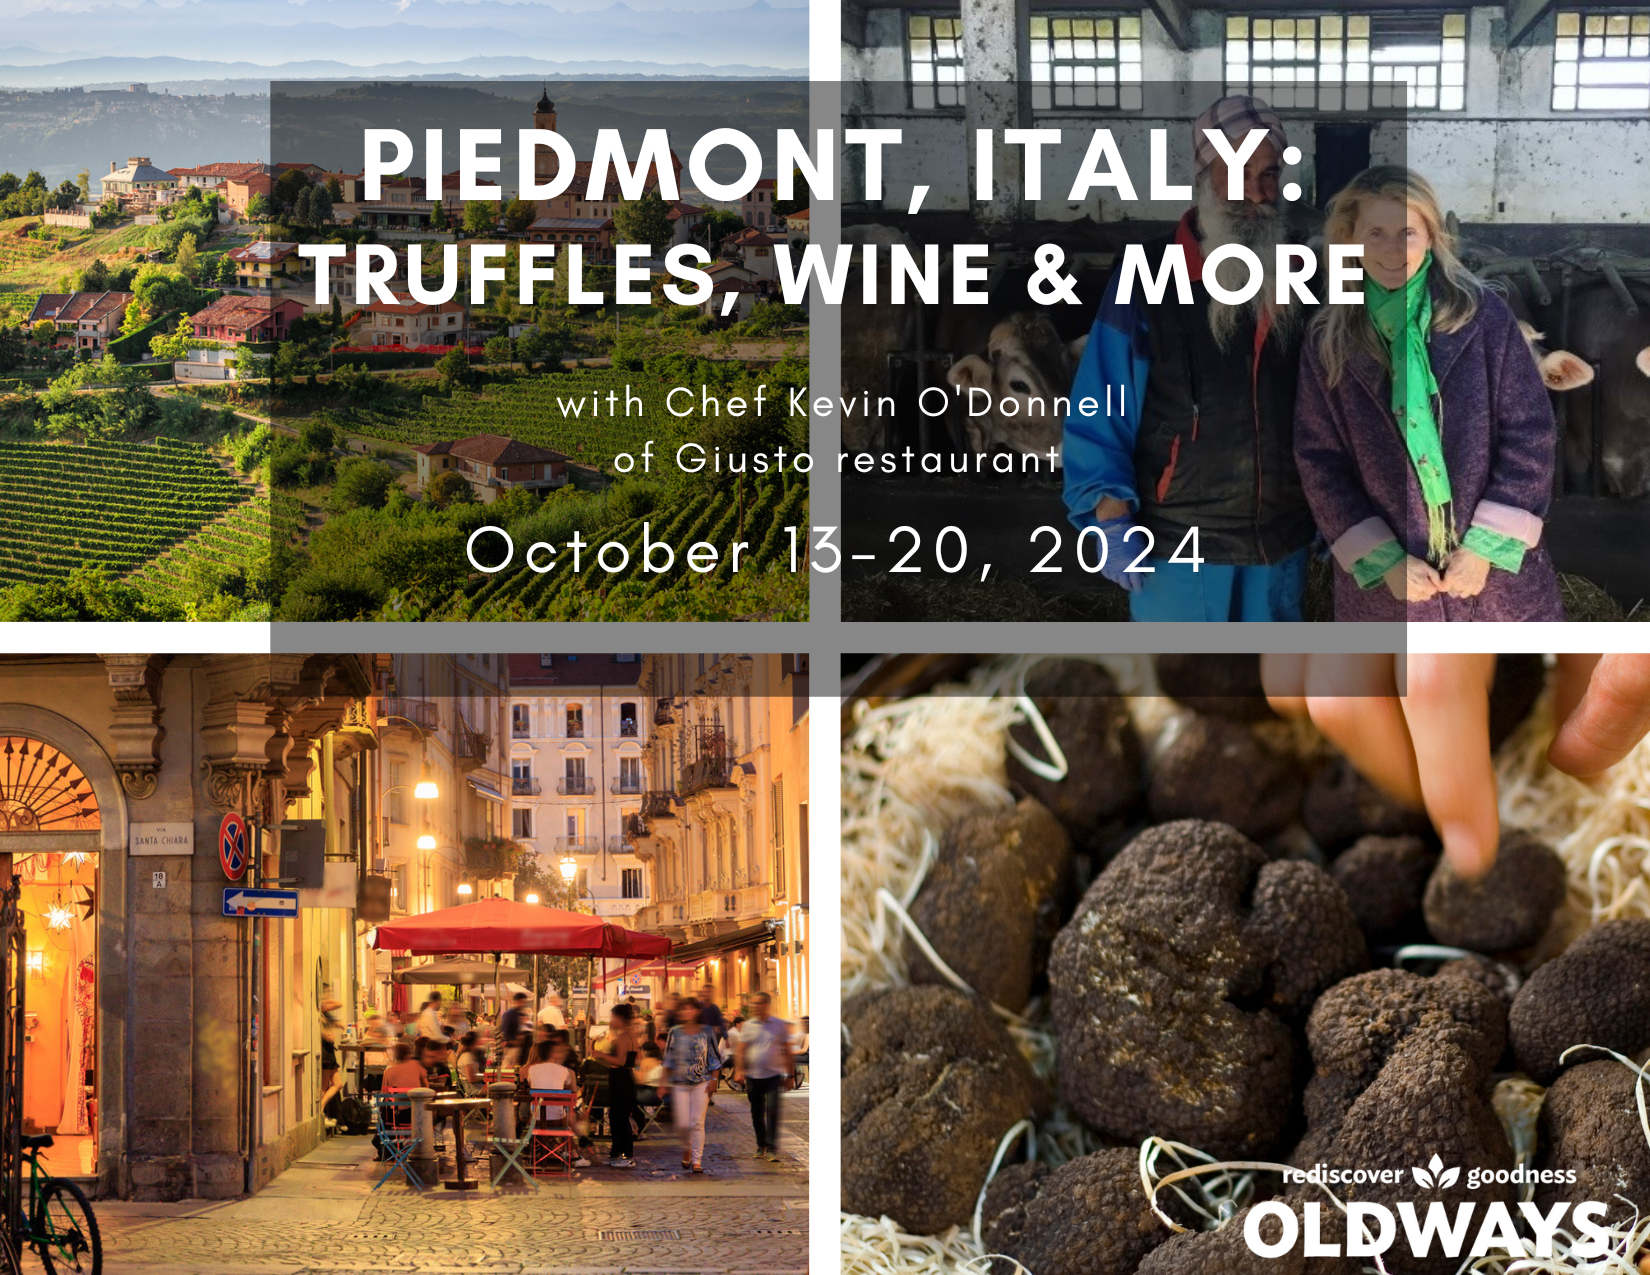 Follow your taste buds from Newport restaurant Giusto to Piedmont, Italy